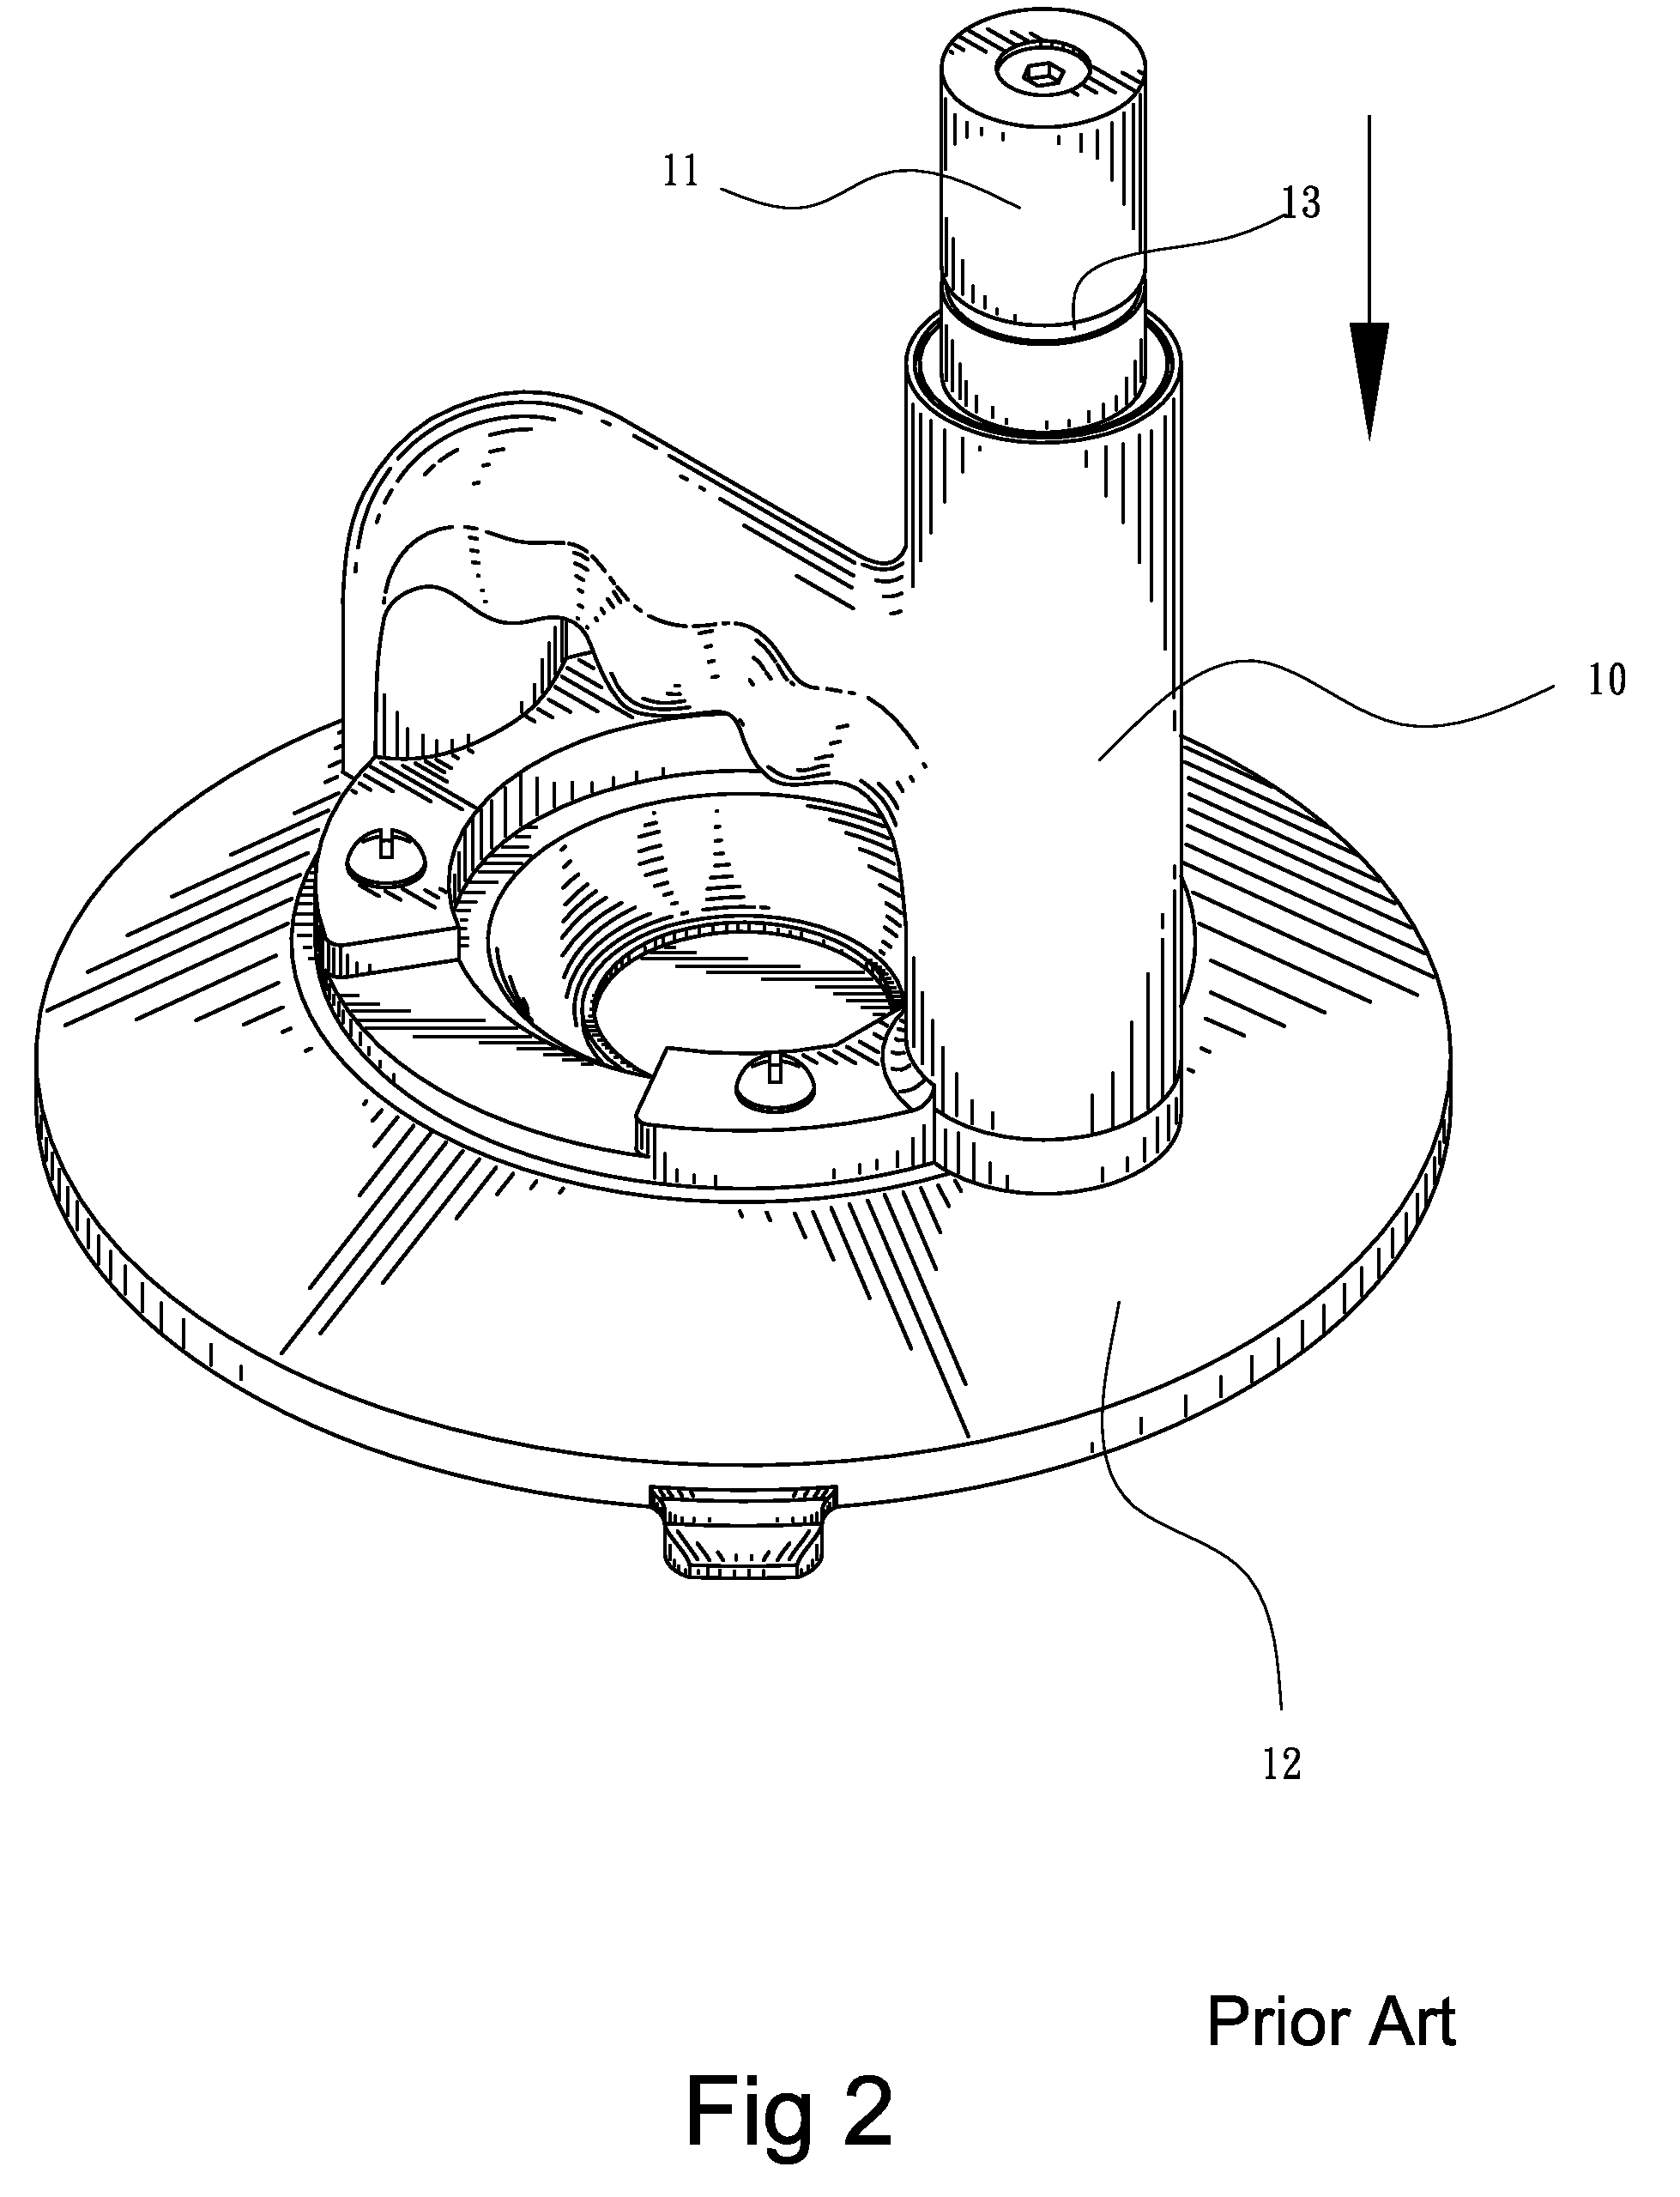 Automatic alert device for suction cup